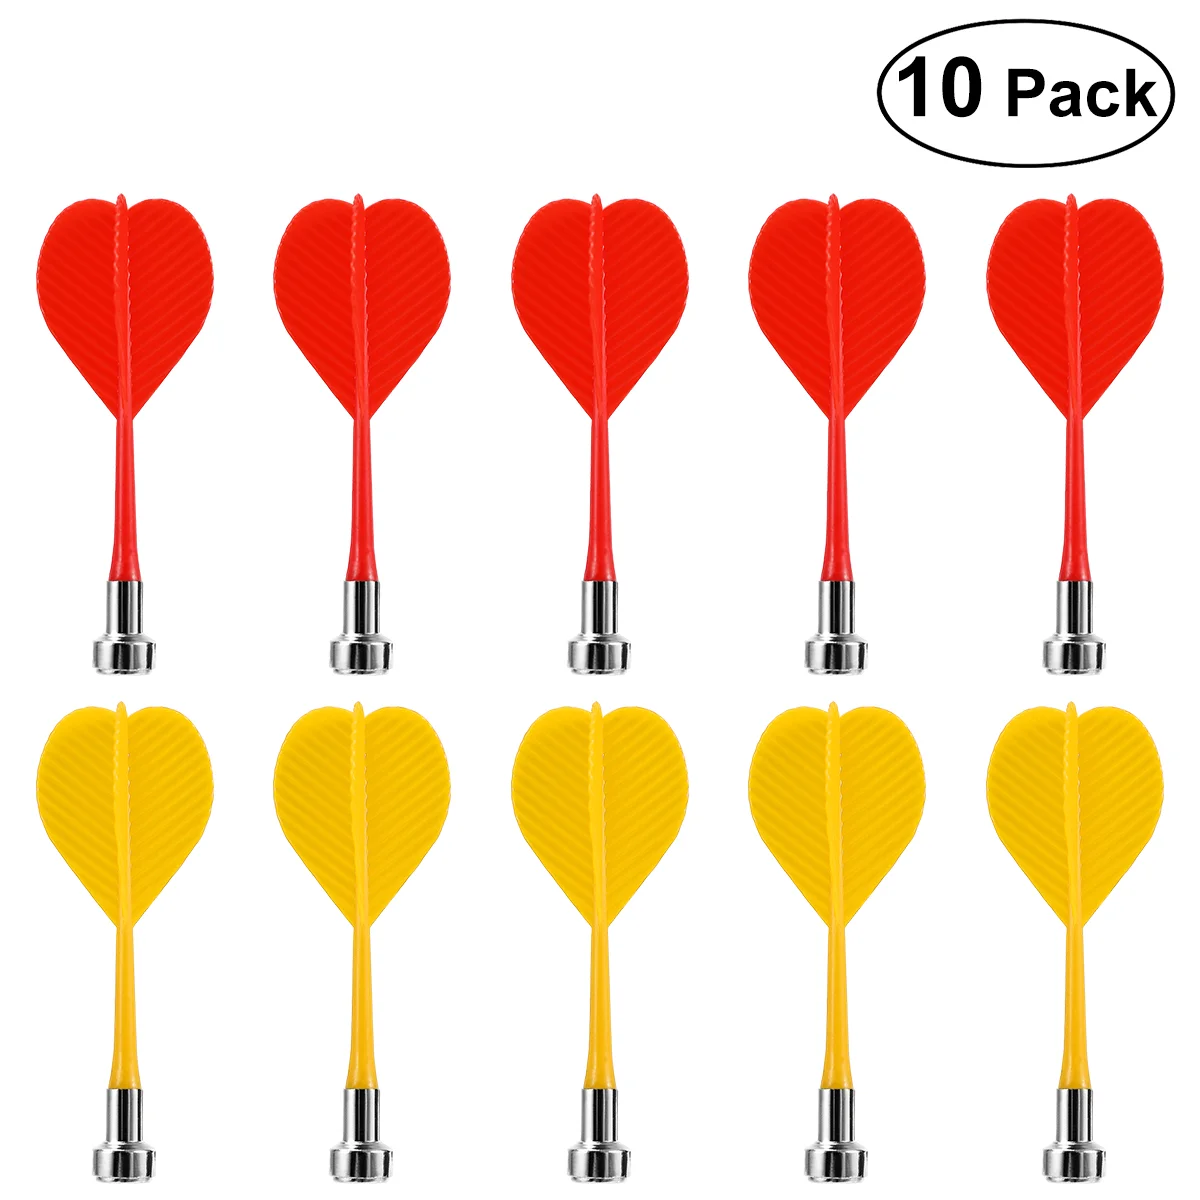 NUOLUX 10pcs Replacement Durable Safe Plastic Wing Magnetic Darts Bullseye Game Toys (Red & Yellow)